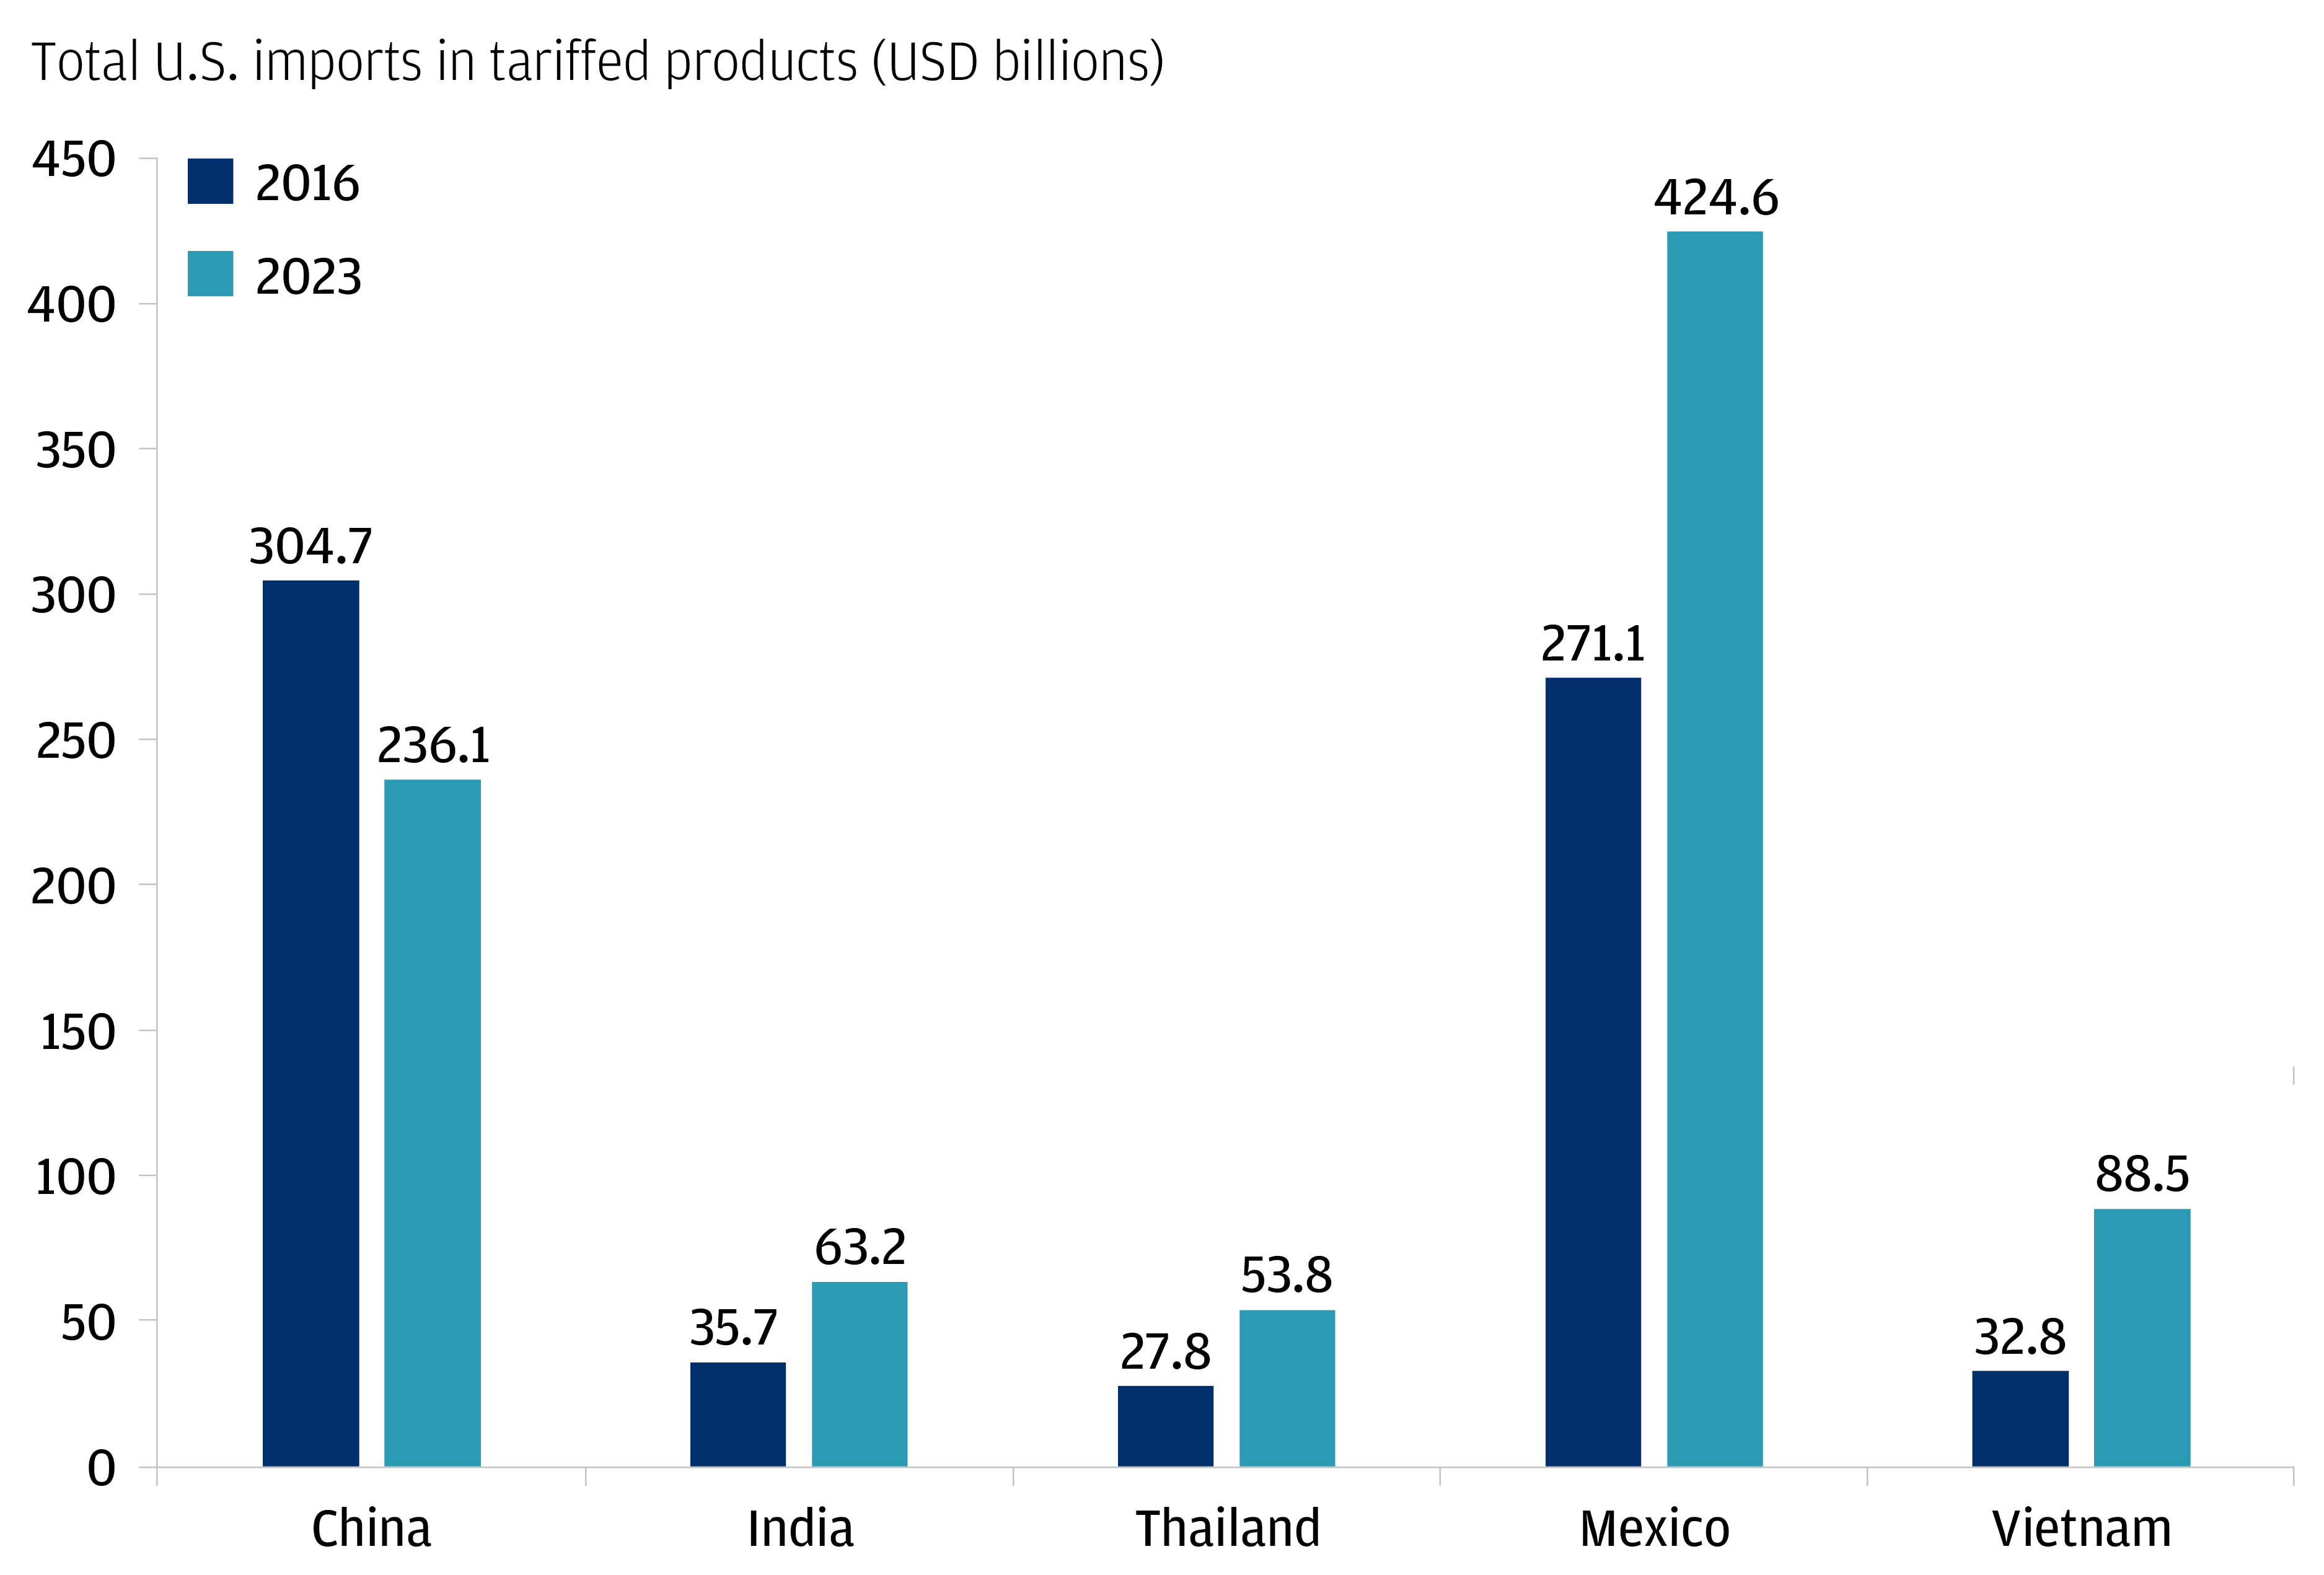 The chart describes the total U.S. imports in tariffed products in USD Billion for 2016 and 2023. 